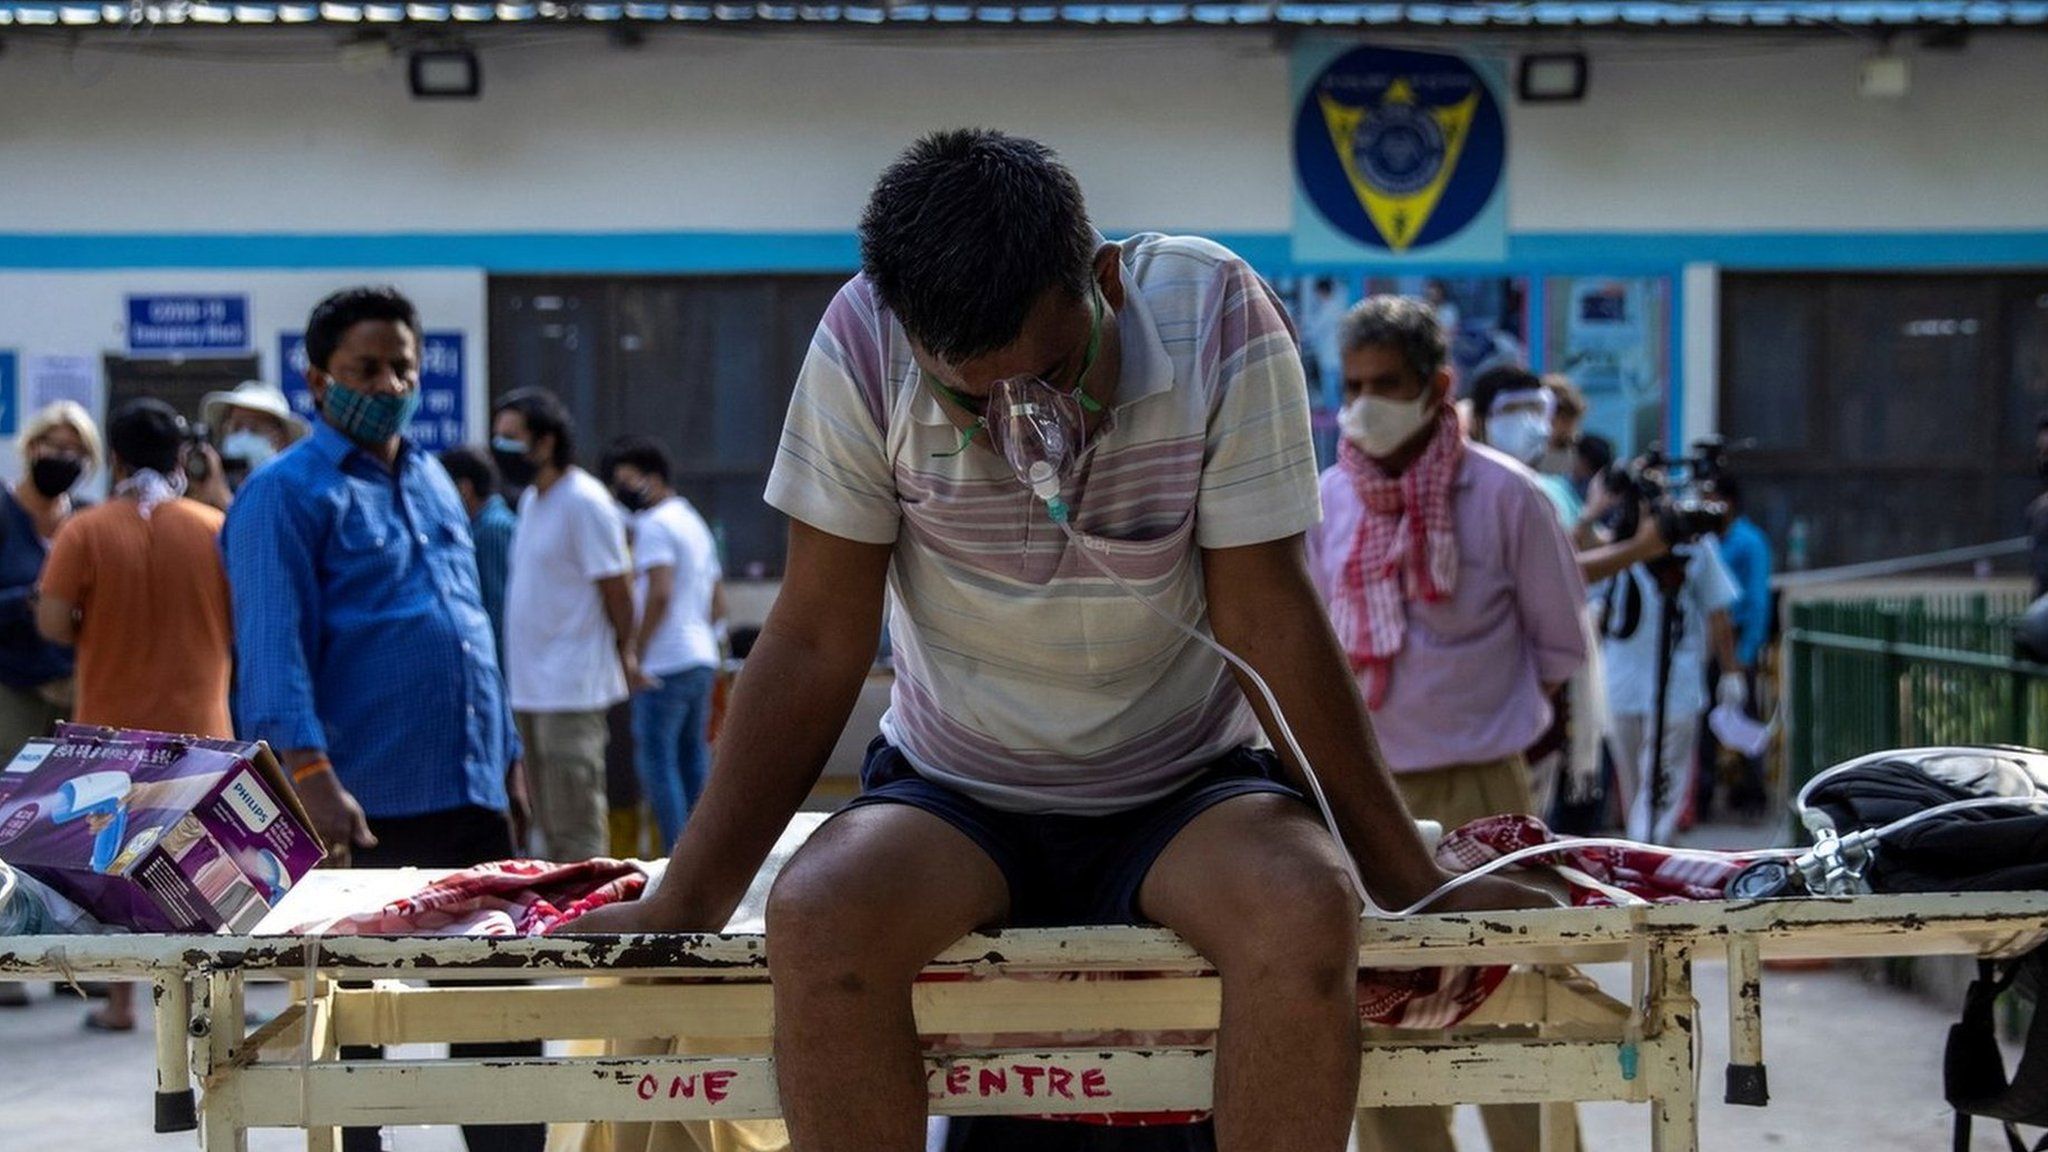 A patient suffering from the coronavirus disease waits to get admitted outside the casualty ward at Guru Teg Bahadur hospital, amidst the spread of the disease in New Delhi, India, April 23, 2021